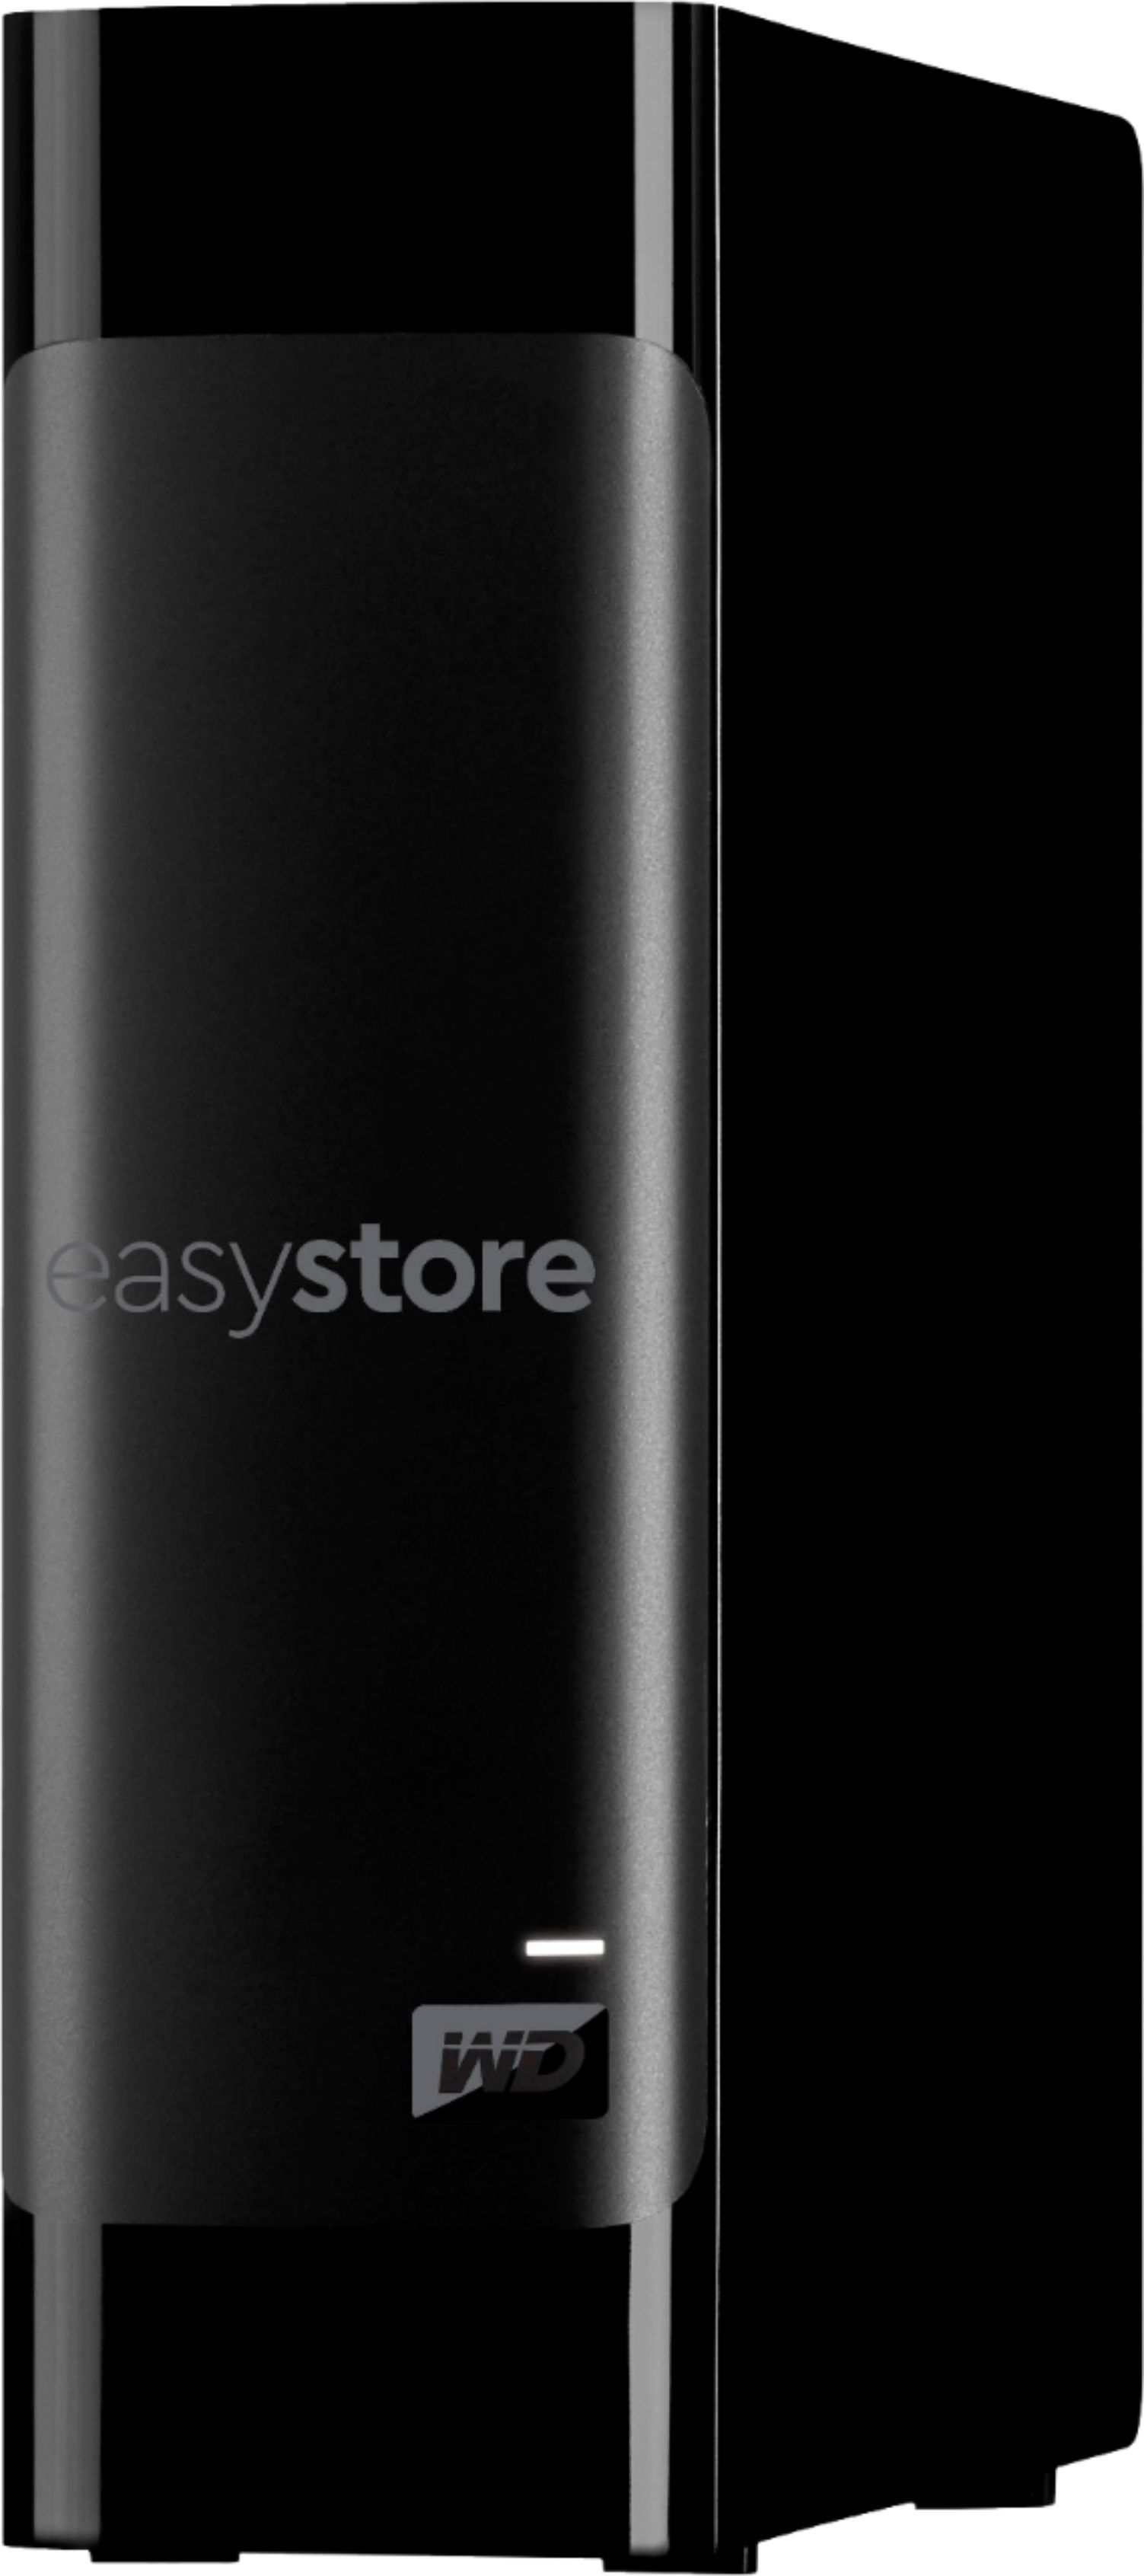 24 hour sale on some Best Buy easystores 14TB $199.99